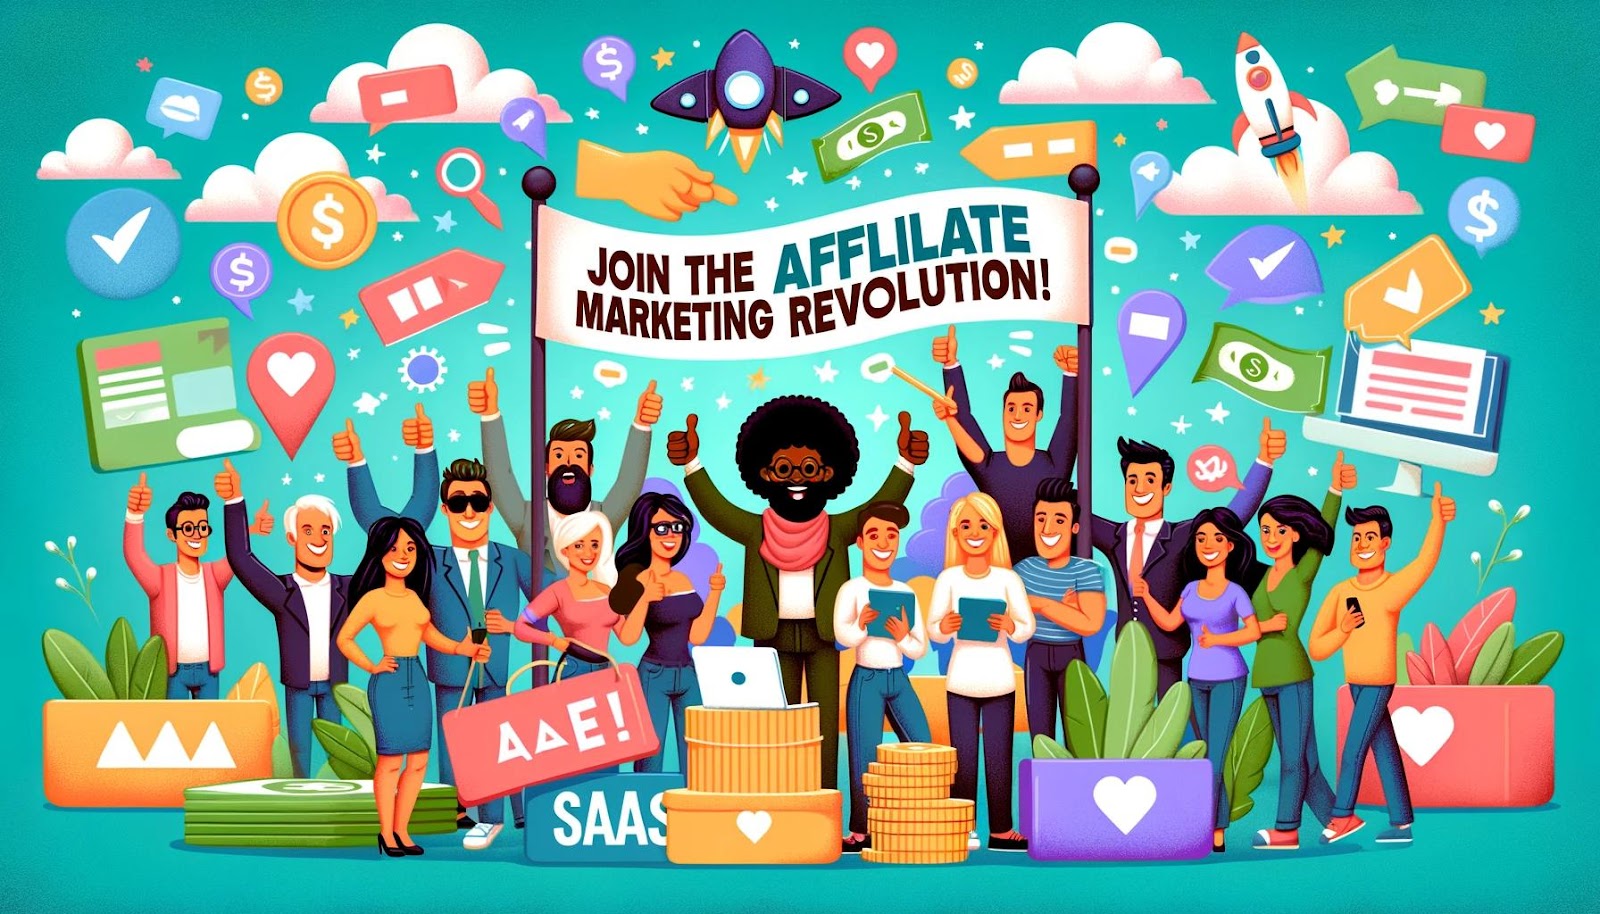 Should I use Affiliate Marketing to Promote my SaaS Business?